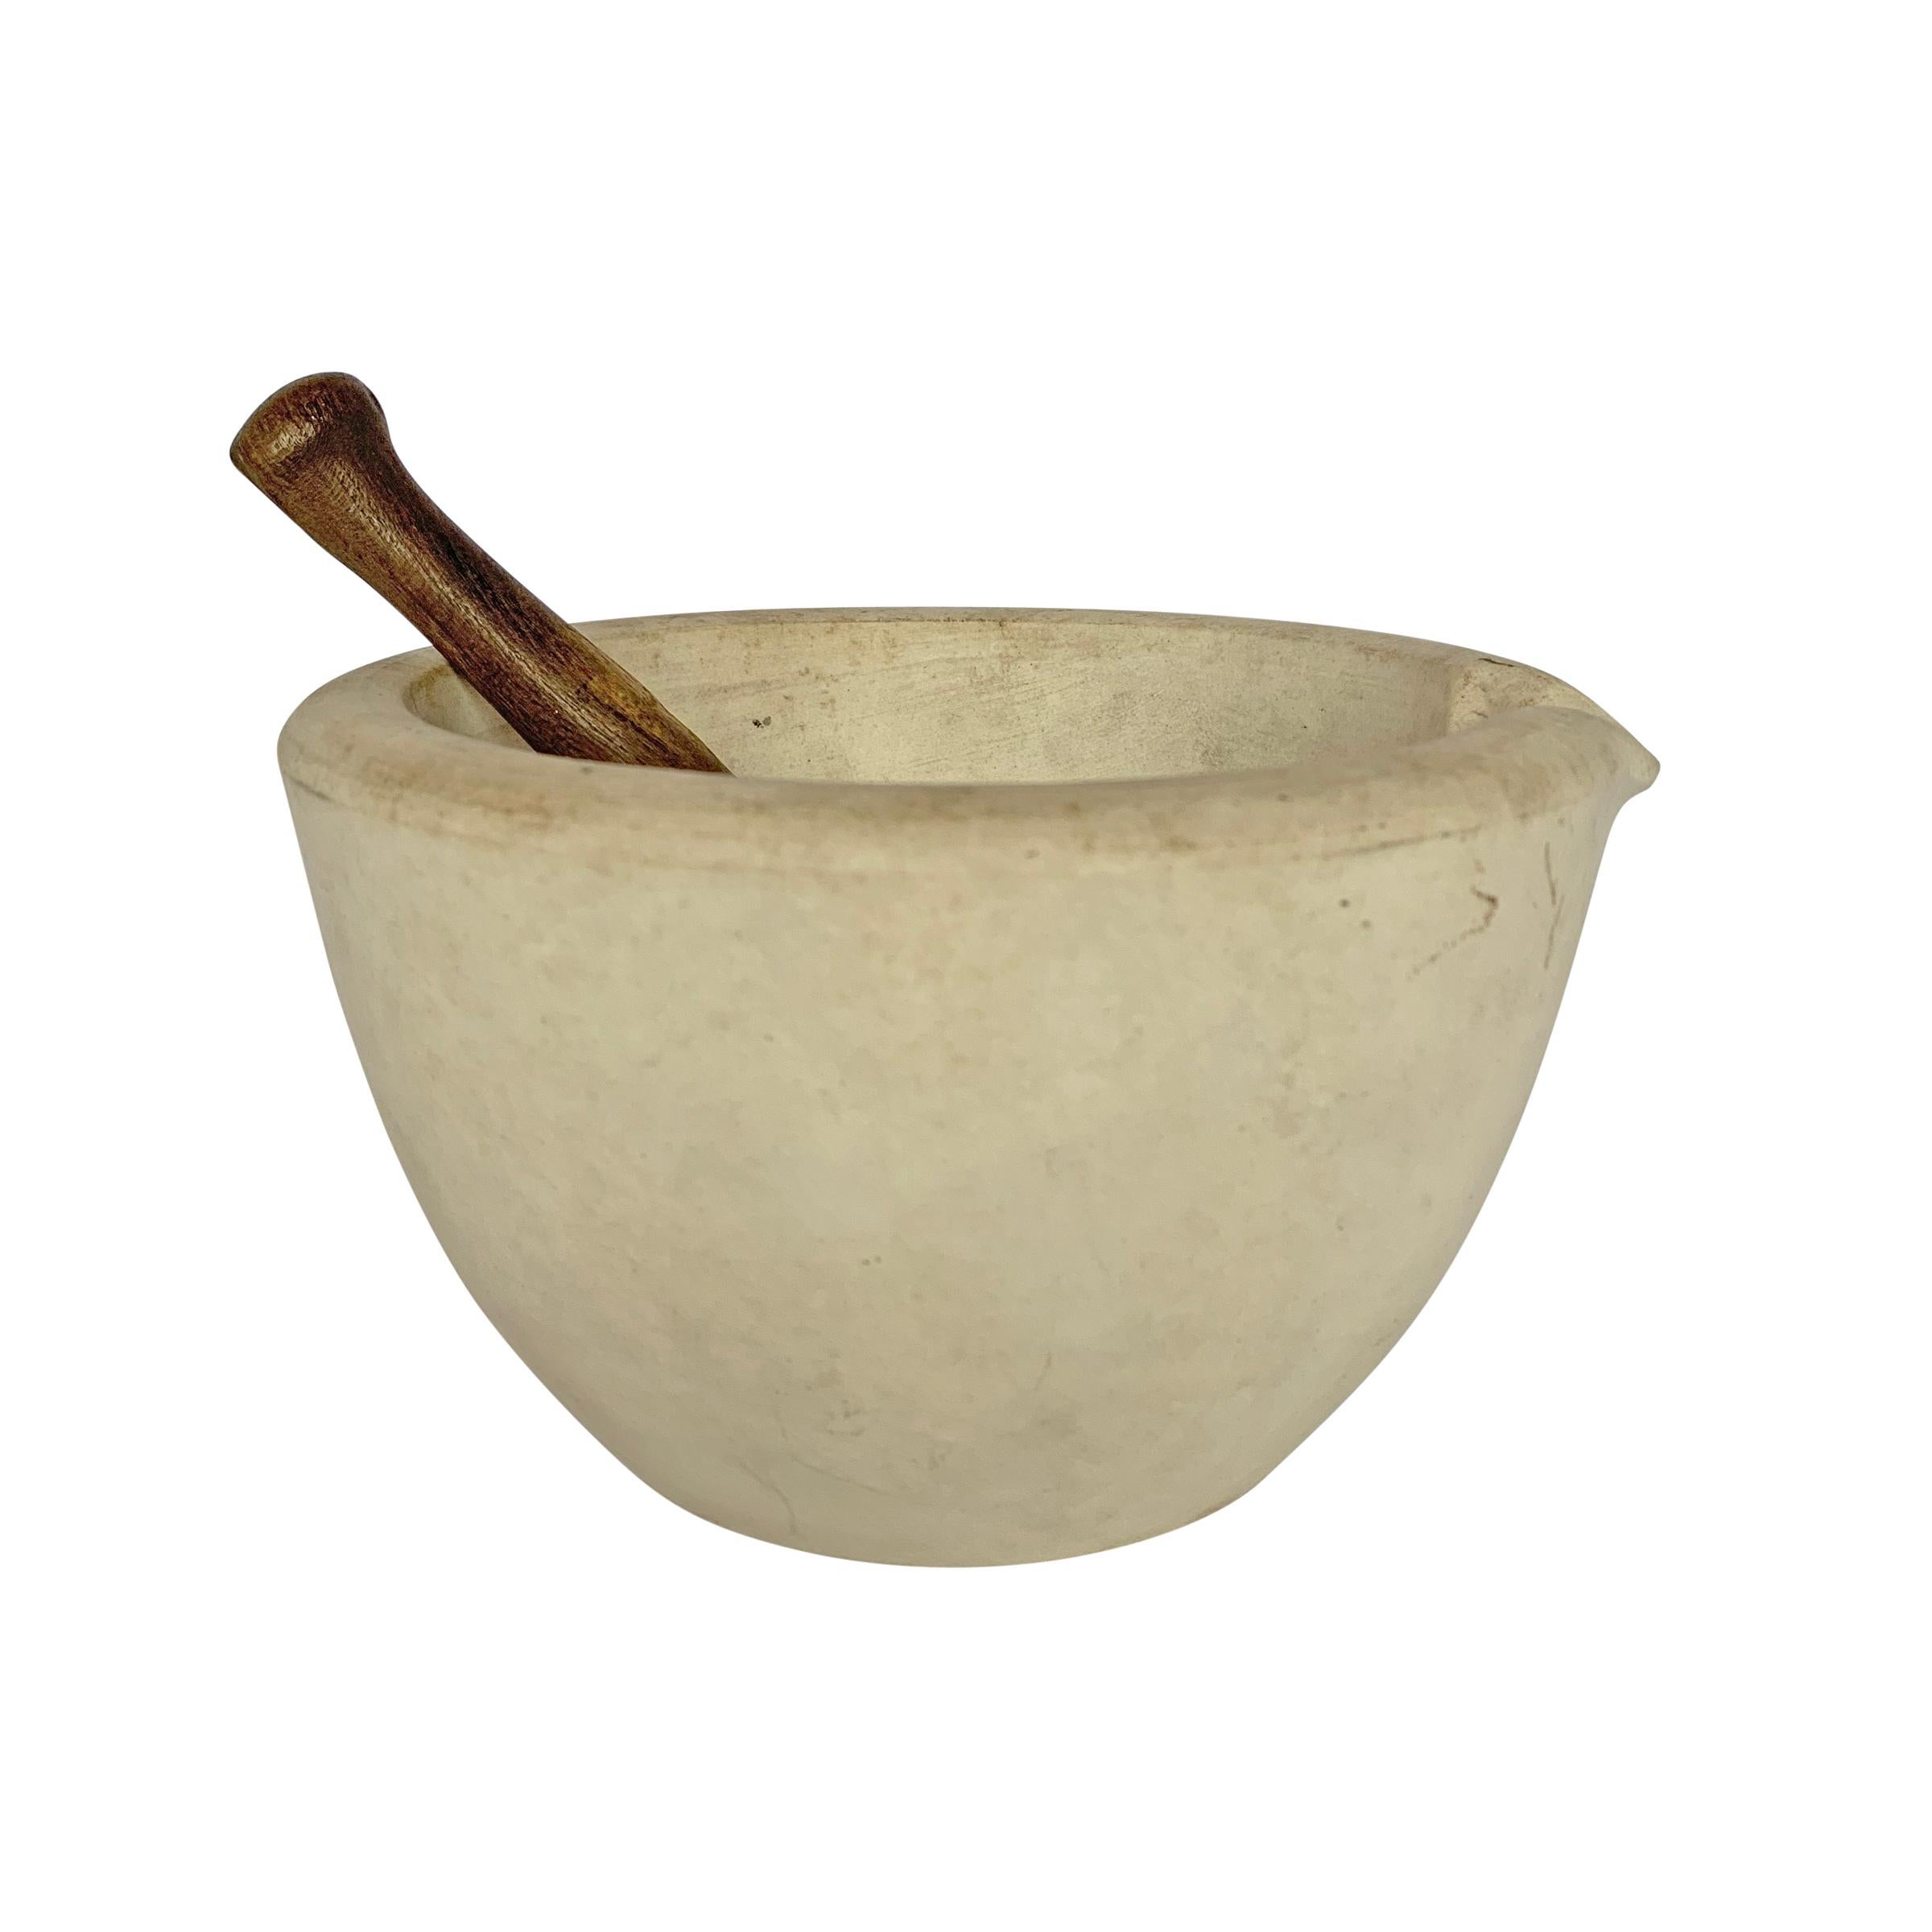 A 19th century American porcelain mortar and pestle from the Thomas Maddock & Sons, Trenton, NJ. The pestle has a wood handle with a smooth porcelain end. There are two marks on the bottom. One is the mark of the manufacturer, Thomas Maddock & Sons,